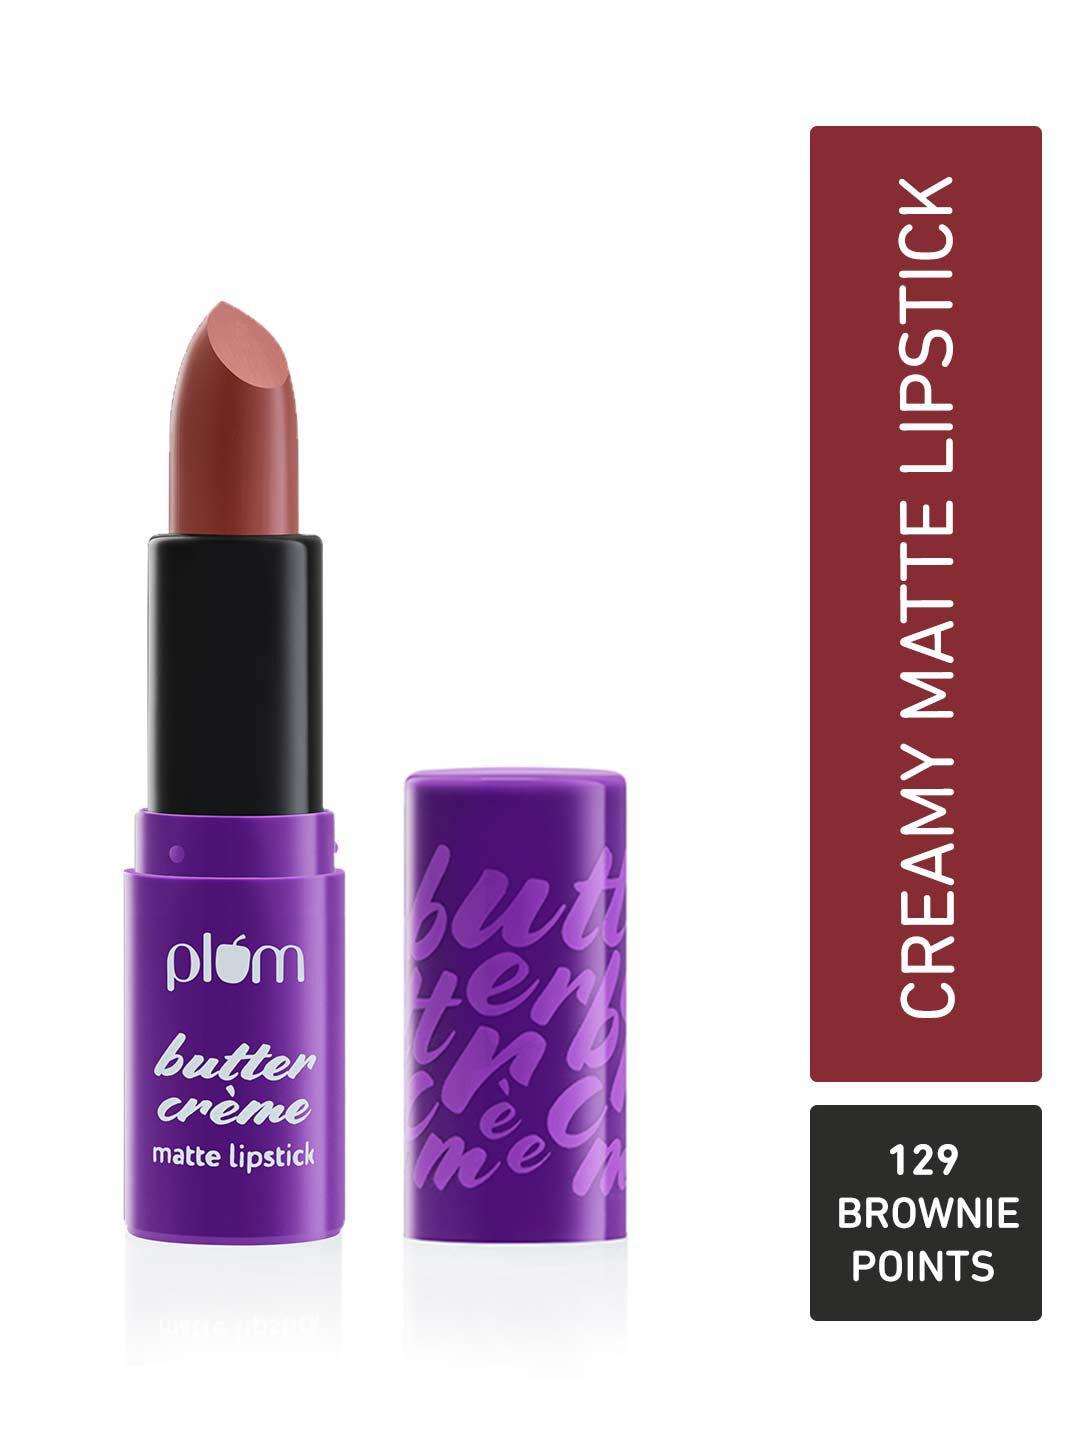 plum butter creme highly pigmented lightweight matte lipstick - brownie points 129